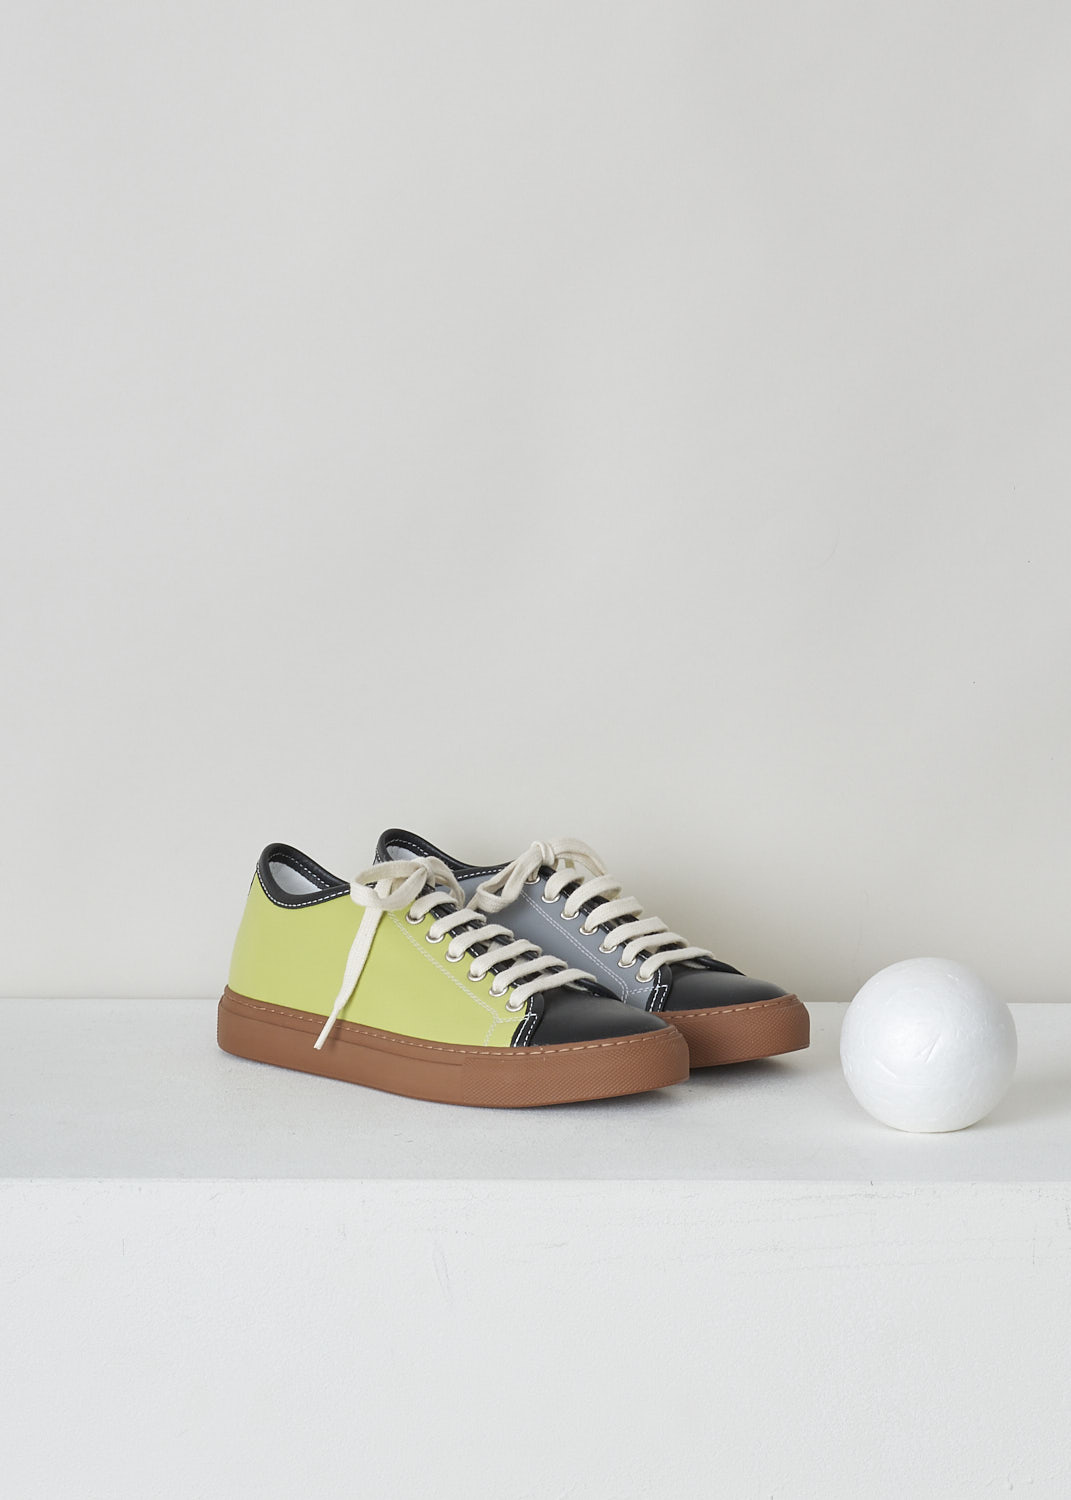 SOFIE D’HOORE, MULTICOLOR LACE-UP FRIDA SNEAKERS, FRIDA_LTHREE_LIME_BLACK_SHARK, Black, Green, Grey, Front, The low-top leather sneakers are made up of three colors: grey, black, and lime green. White contrasting stitching can be found throughout. The sneakers feature front lace-up fastening and a flat brown rubber sole.
